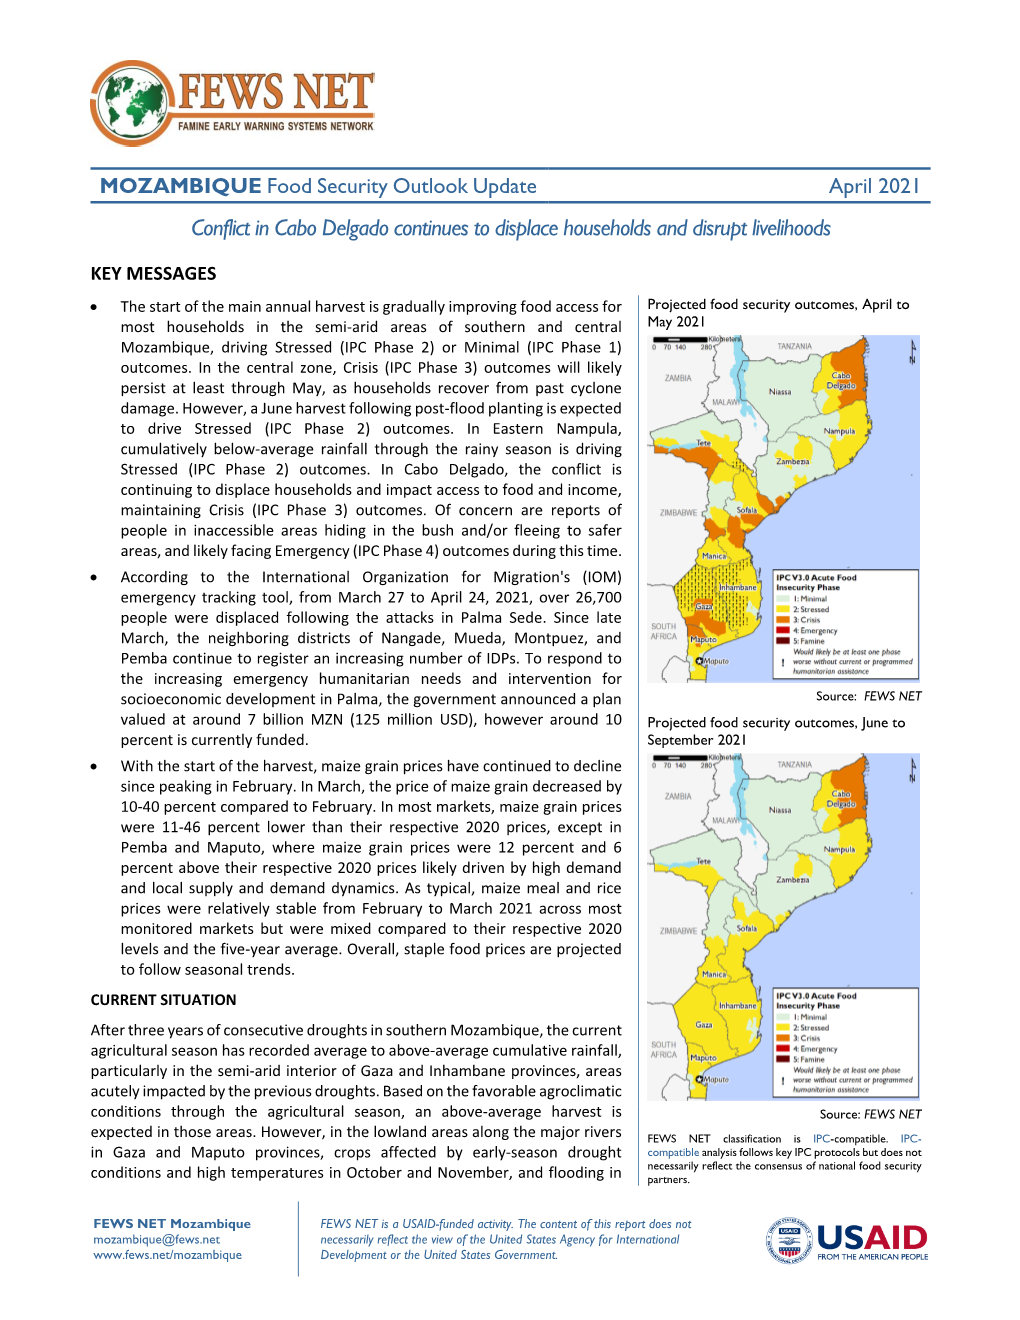 Conflict in Cabo Delgado Continues to Displace Households and Disrupt Livelihoods